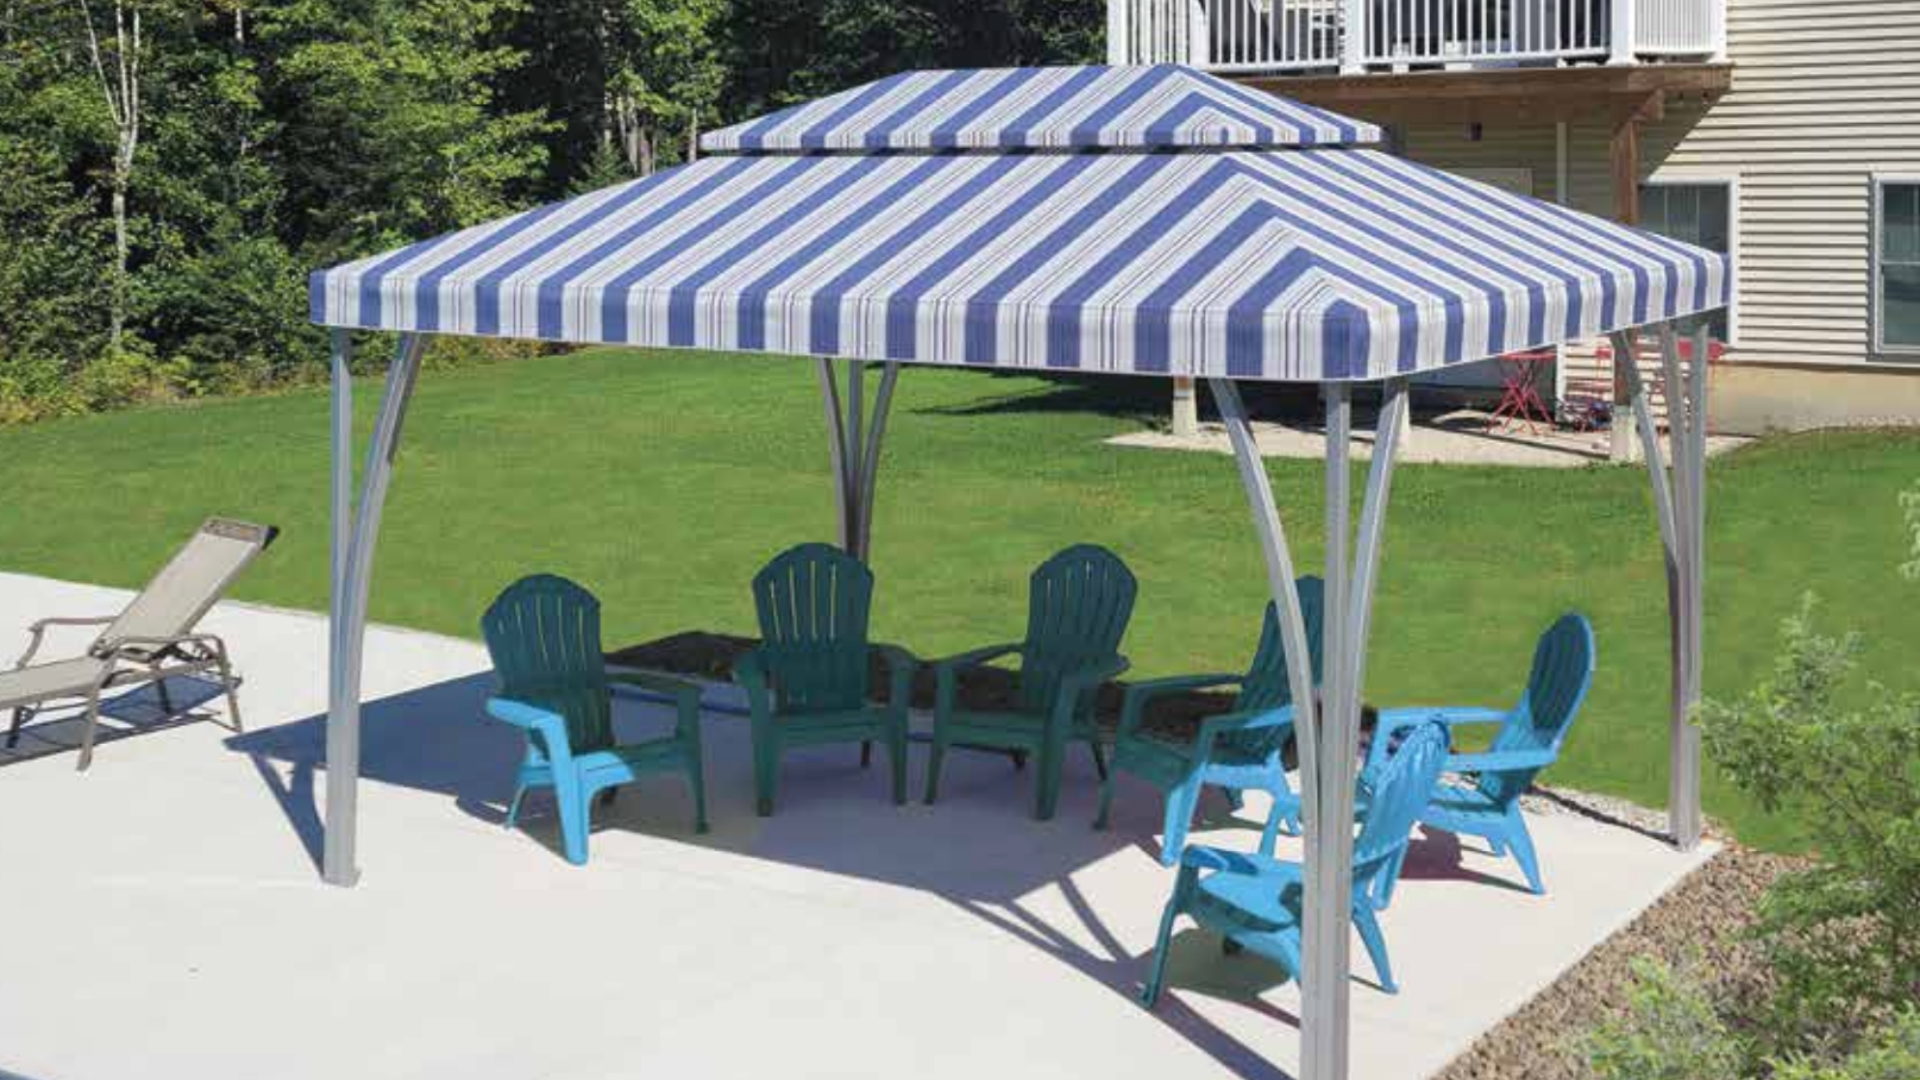 Safety Considerations to Keep in Mind When Putting Up an Open Air Cabana